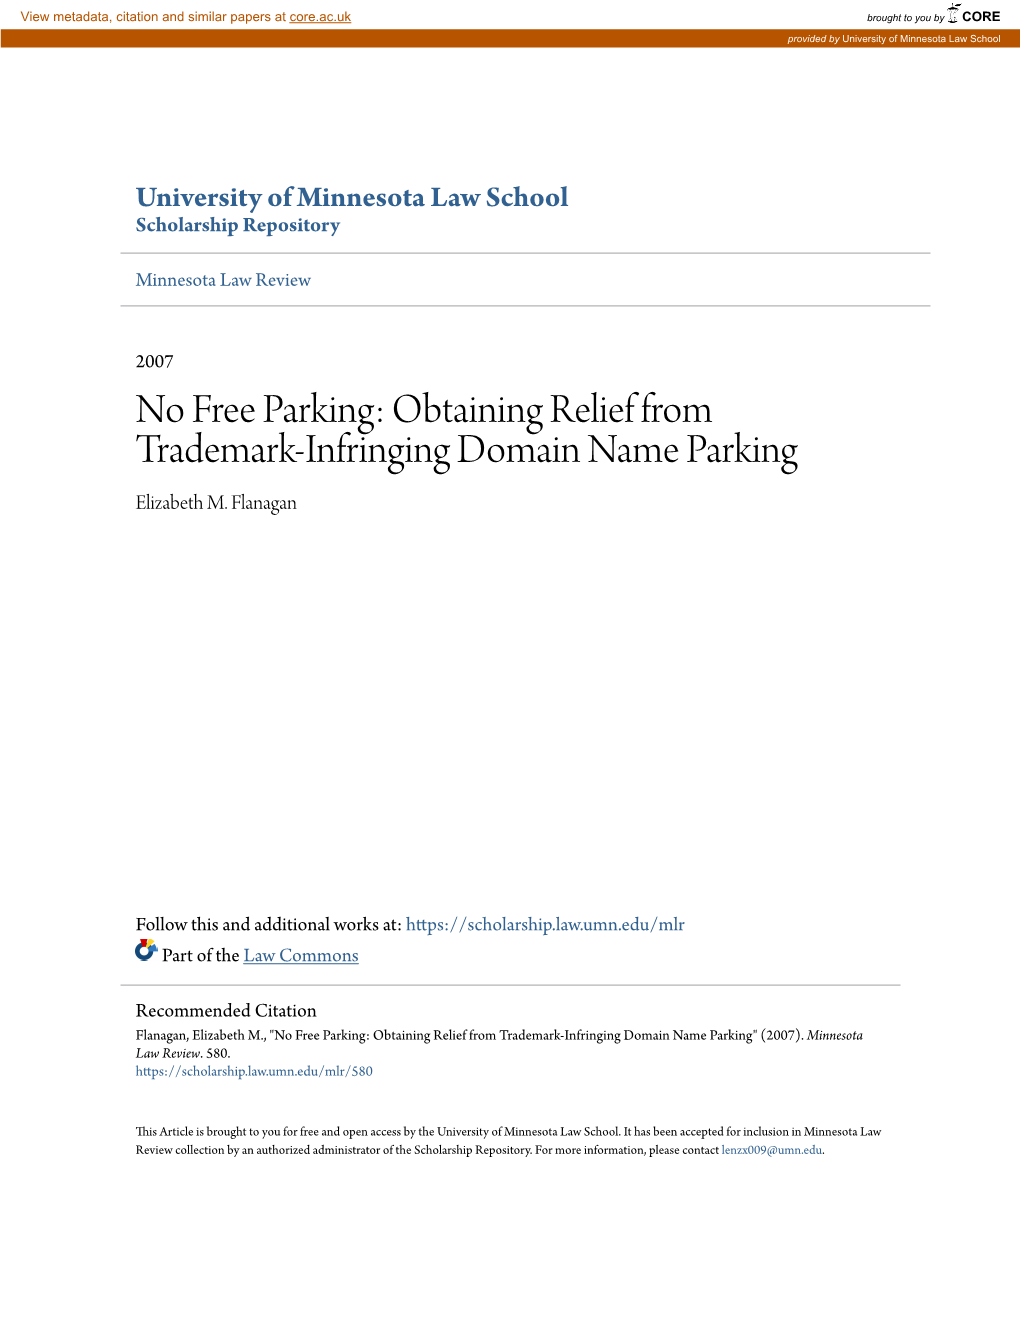 No Free Parking: Obtaining Relief from Trademark-Infringing Domain Name Parking Elizabeth M